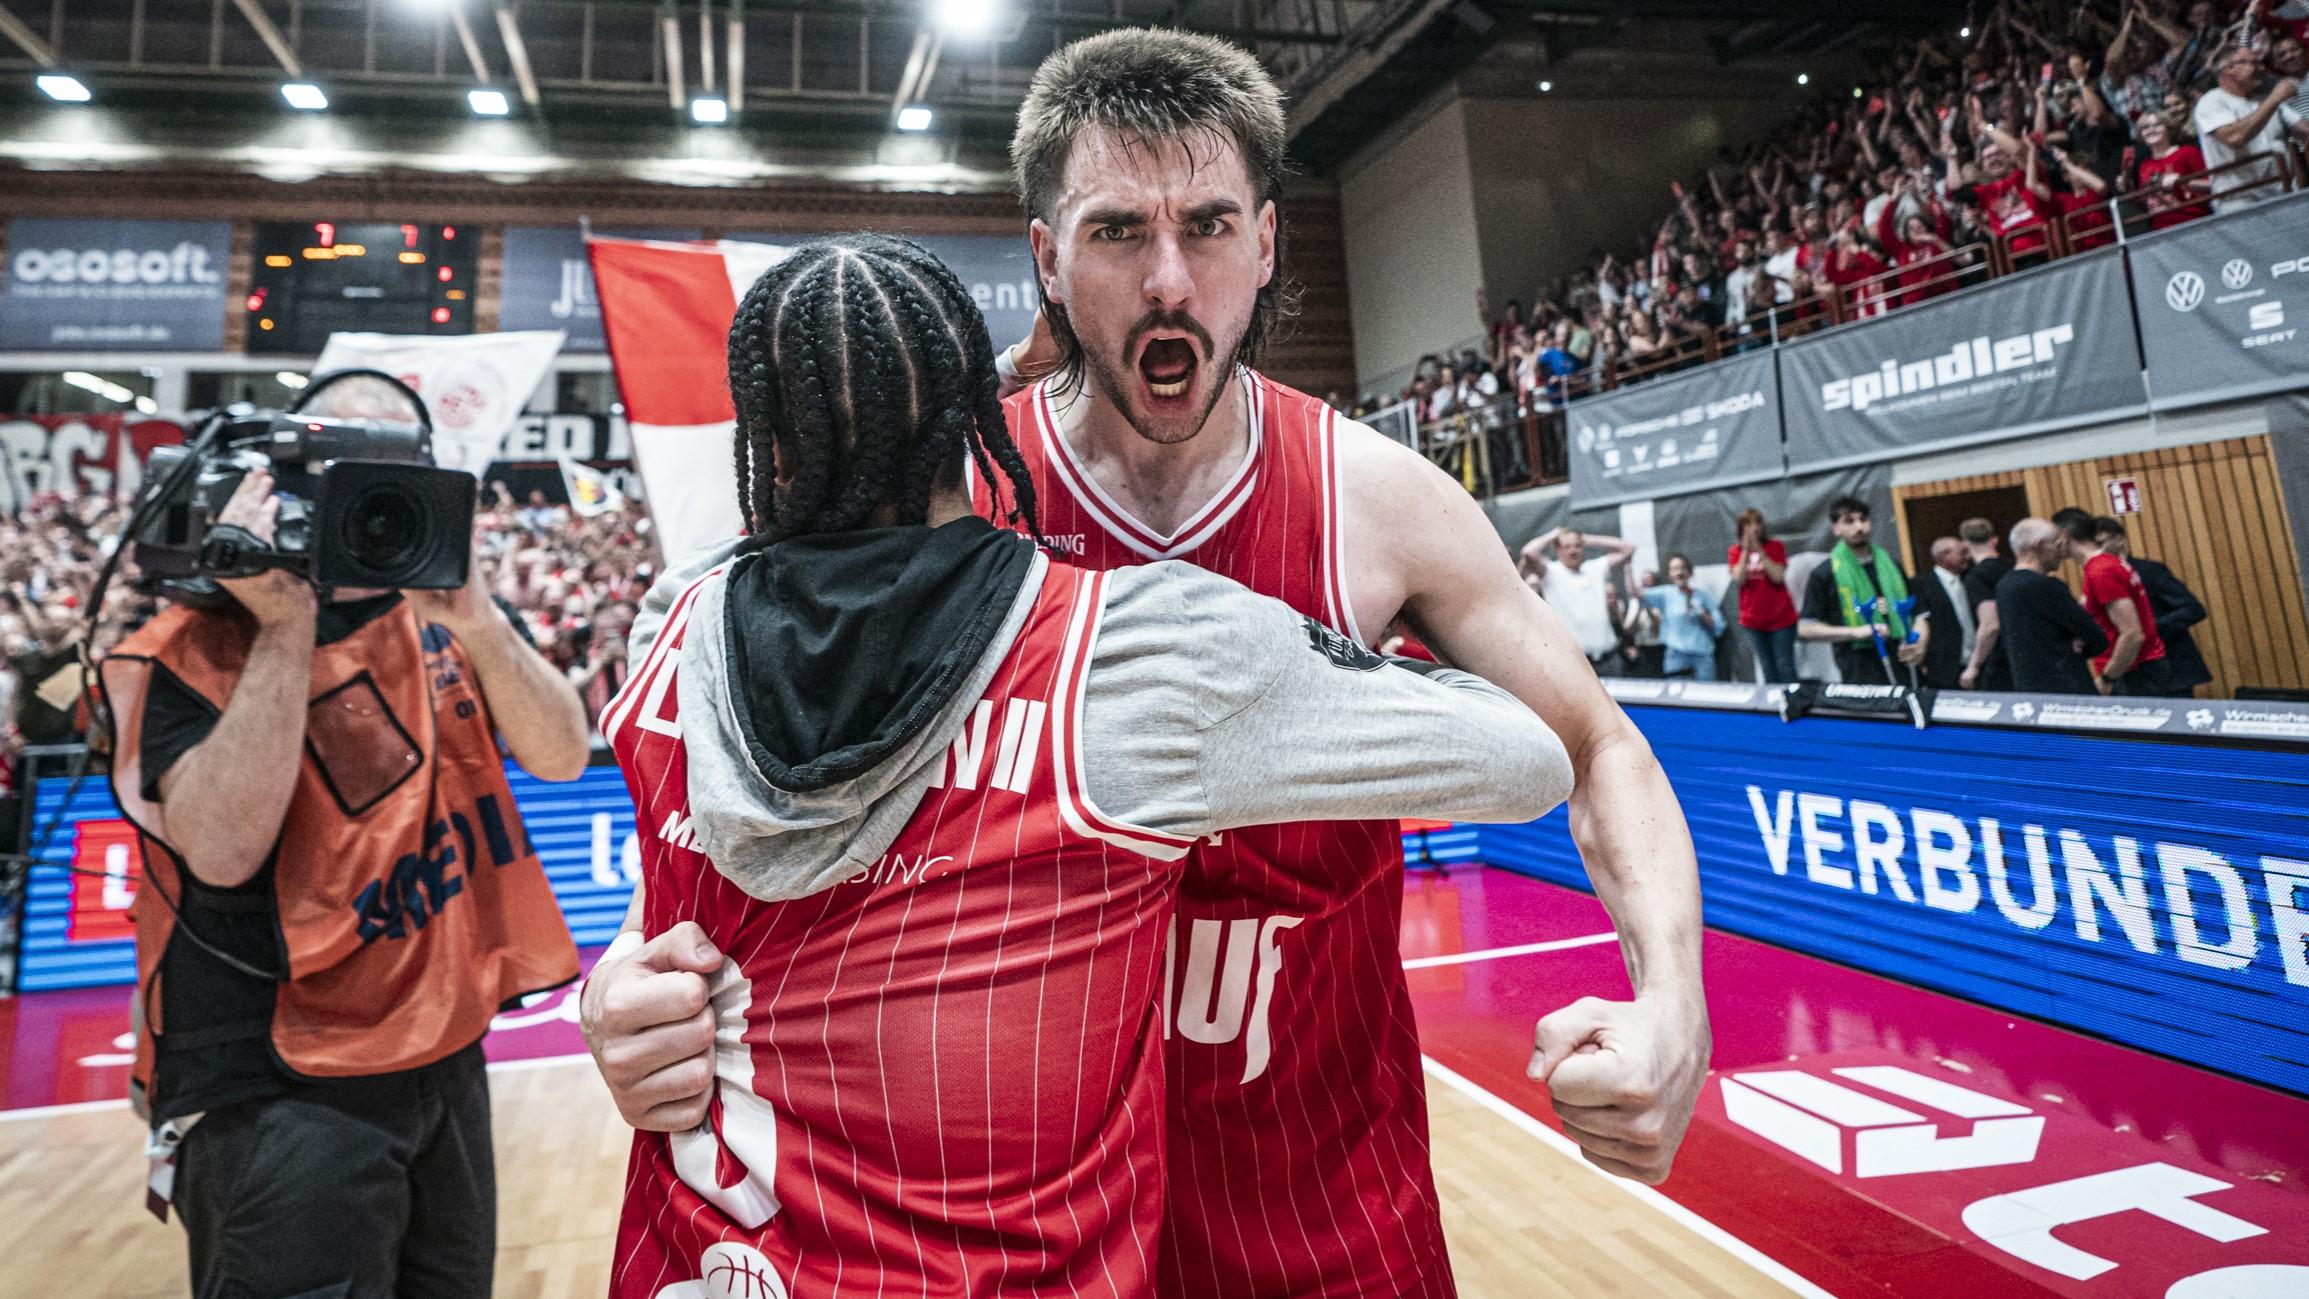 The Semi-Finals of the easyCredit BBL are set with Würzburg Baskets eliminating the reigning champions ratiopharm ulm to reach the last four for the first time since 2012 despite not having the injured league MVP Otis Livingston. NINERS Chemnitz advanced to their first-ever Semi-Finals and were joined by FC Bayern Munich and ALBA BERLIN. The week also saw FRAPORT SKYLINERS earn promotion back to the Bundesliga by reaching the second division ProA Finals.